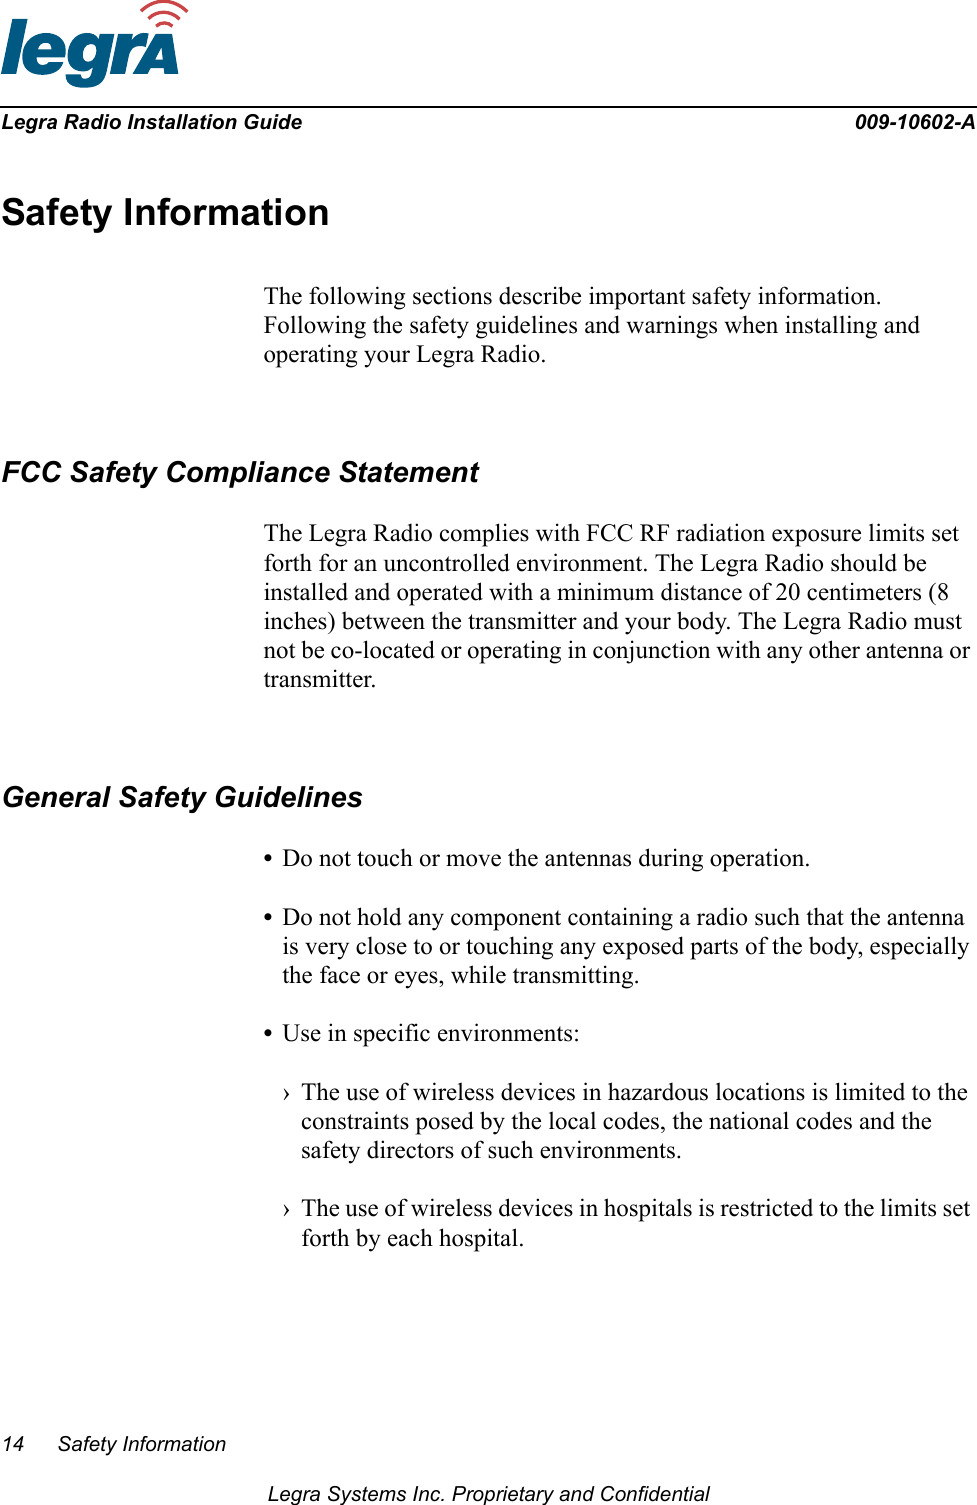 14 Safety InformationLegra Systems Inc. Proprietary and ConfidentialLegra Radio Installation Guide 009-10602-ASafety InformationThe following sections describe important safety information. Following the safety guidelines and warnings when installing and operating your Legra Radio.FCC Safety Compliance StatementThe Legra Radio complies with FCC RF radiation exposure limits set forth for an uncontrolled environment. The Legra Radio should be installed and operated with a minimum distance of 20 centimeters (8 inches) between the transmitter and your body. The Legra Radio must not be co-located or operating in conjunction with any other antenna or transmitter.General Safety Guidelines•Do not touch or move the antennas during operation.•Do not hold any component containing a radio such that the antenna is very close to or touching any exposed parts of the body, especially the face or eyes, while transmitting.•Use in specific environments:› The use of wireless devices in hazardous locations is limited to the constraints posed by the local codes, the national codes and the safety directors of such environments.› The use of wireless devices in hospitals is restricted to the limits set forth by each hospital.